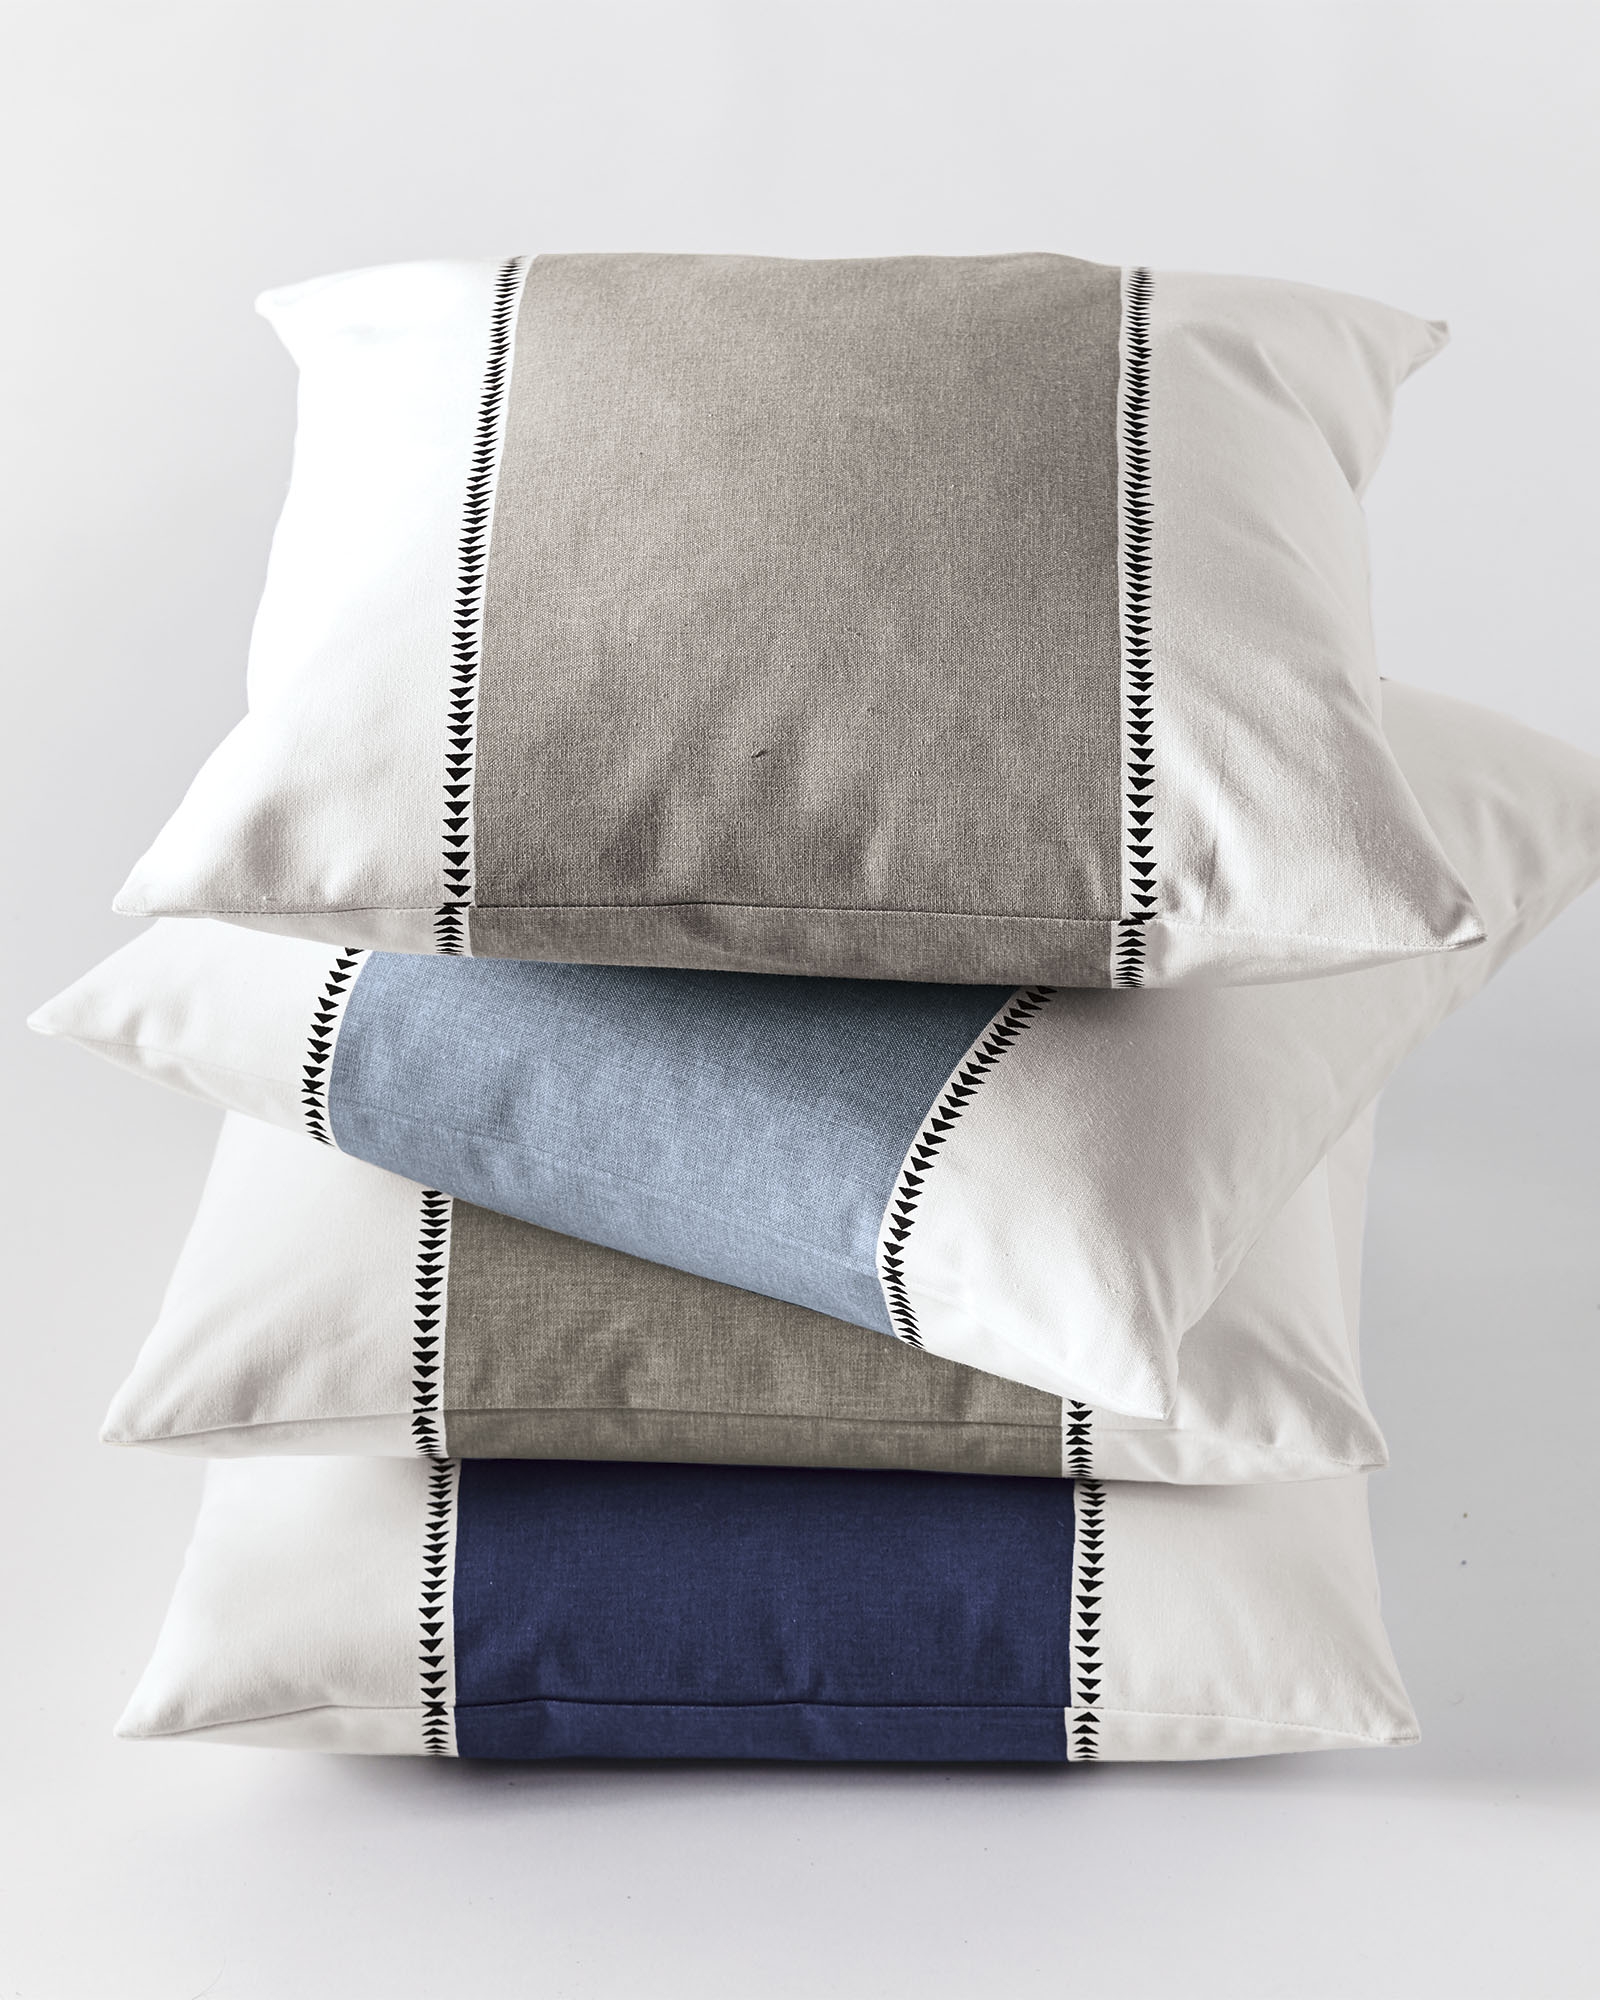 Racing Stripe Pillow Covers - Chambray - 20" x 20" - Insert Not Included - Image 1